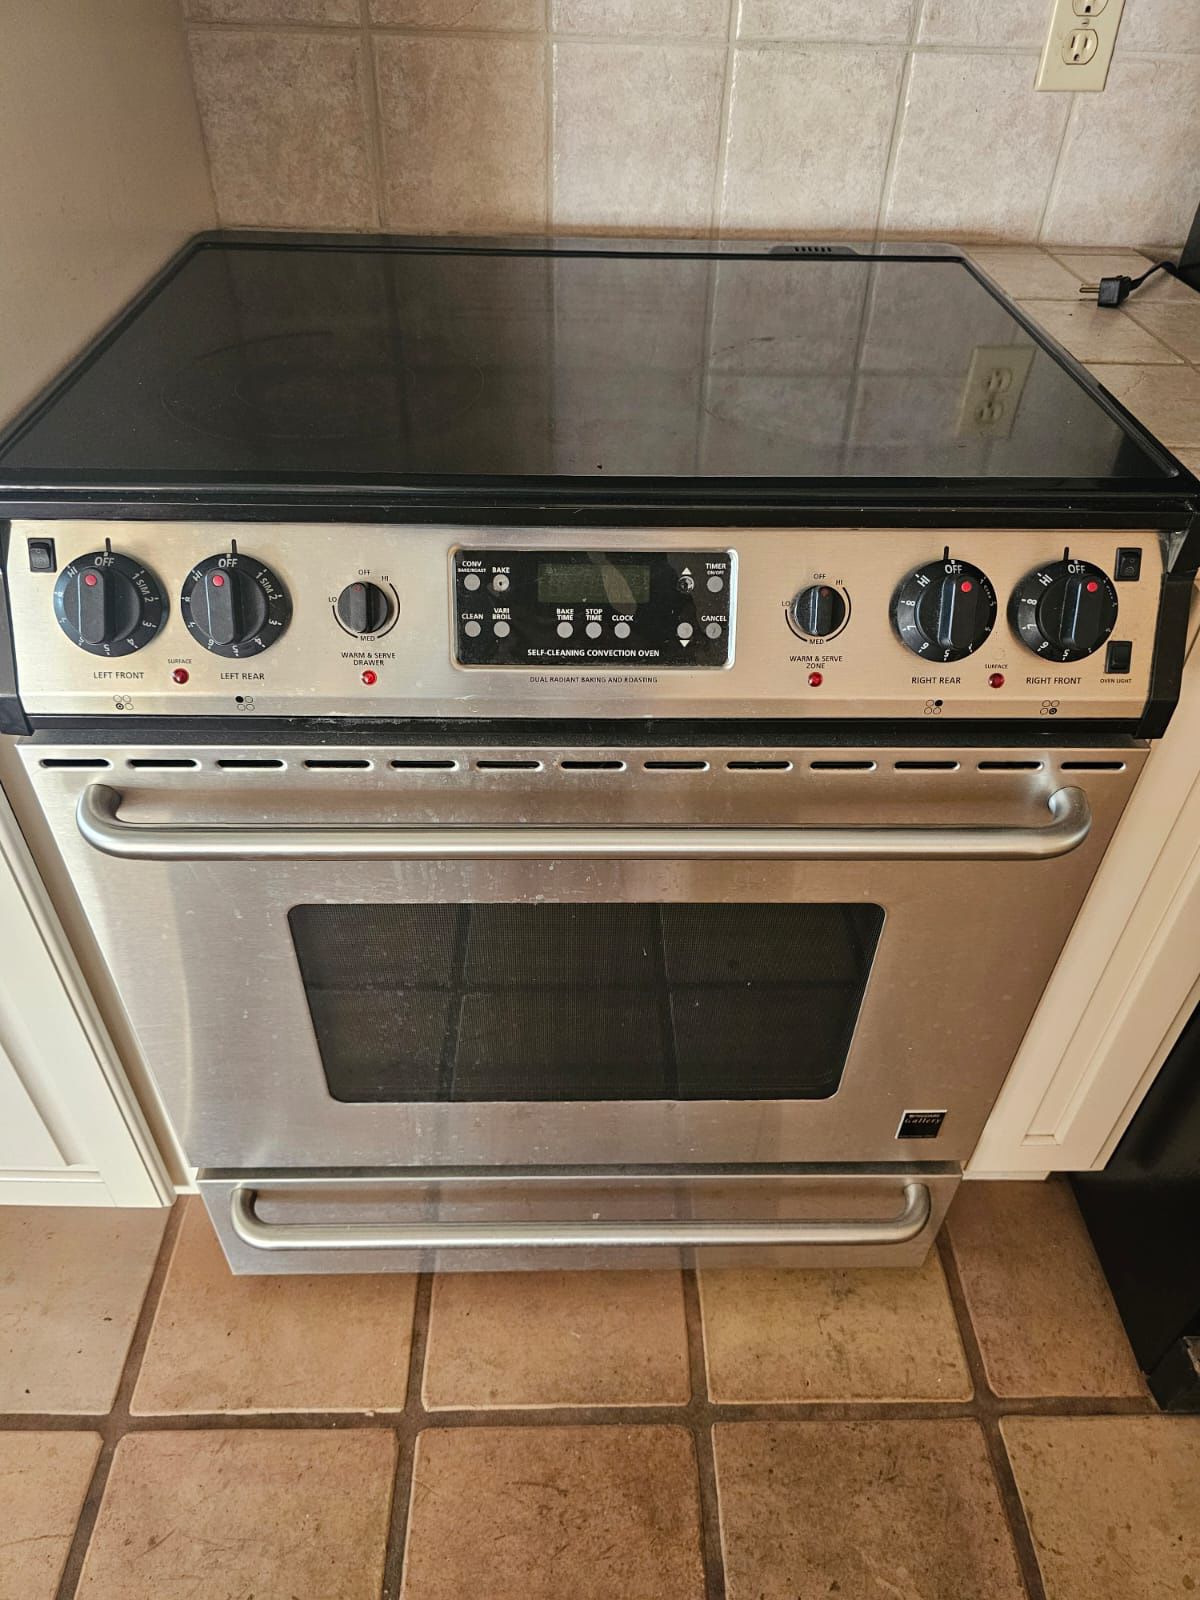 Stove Top & Oven